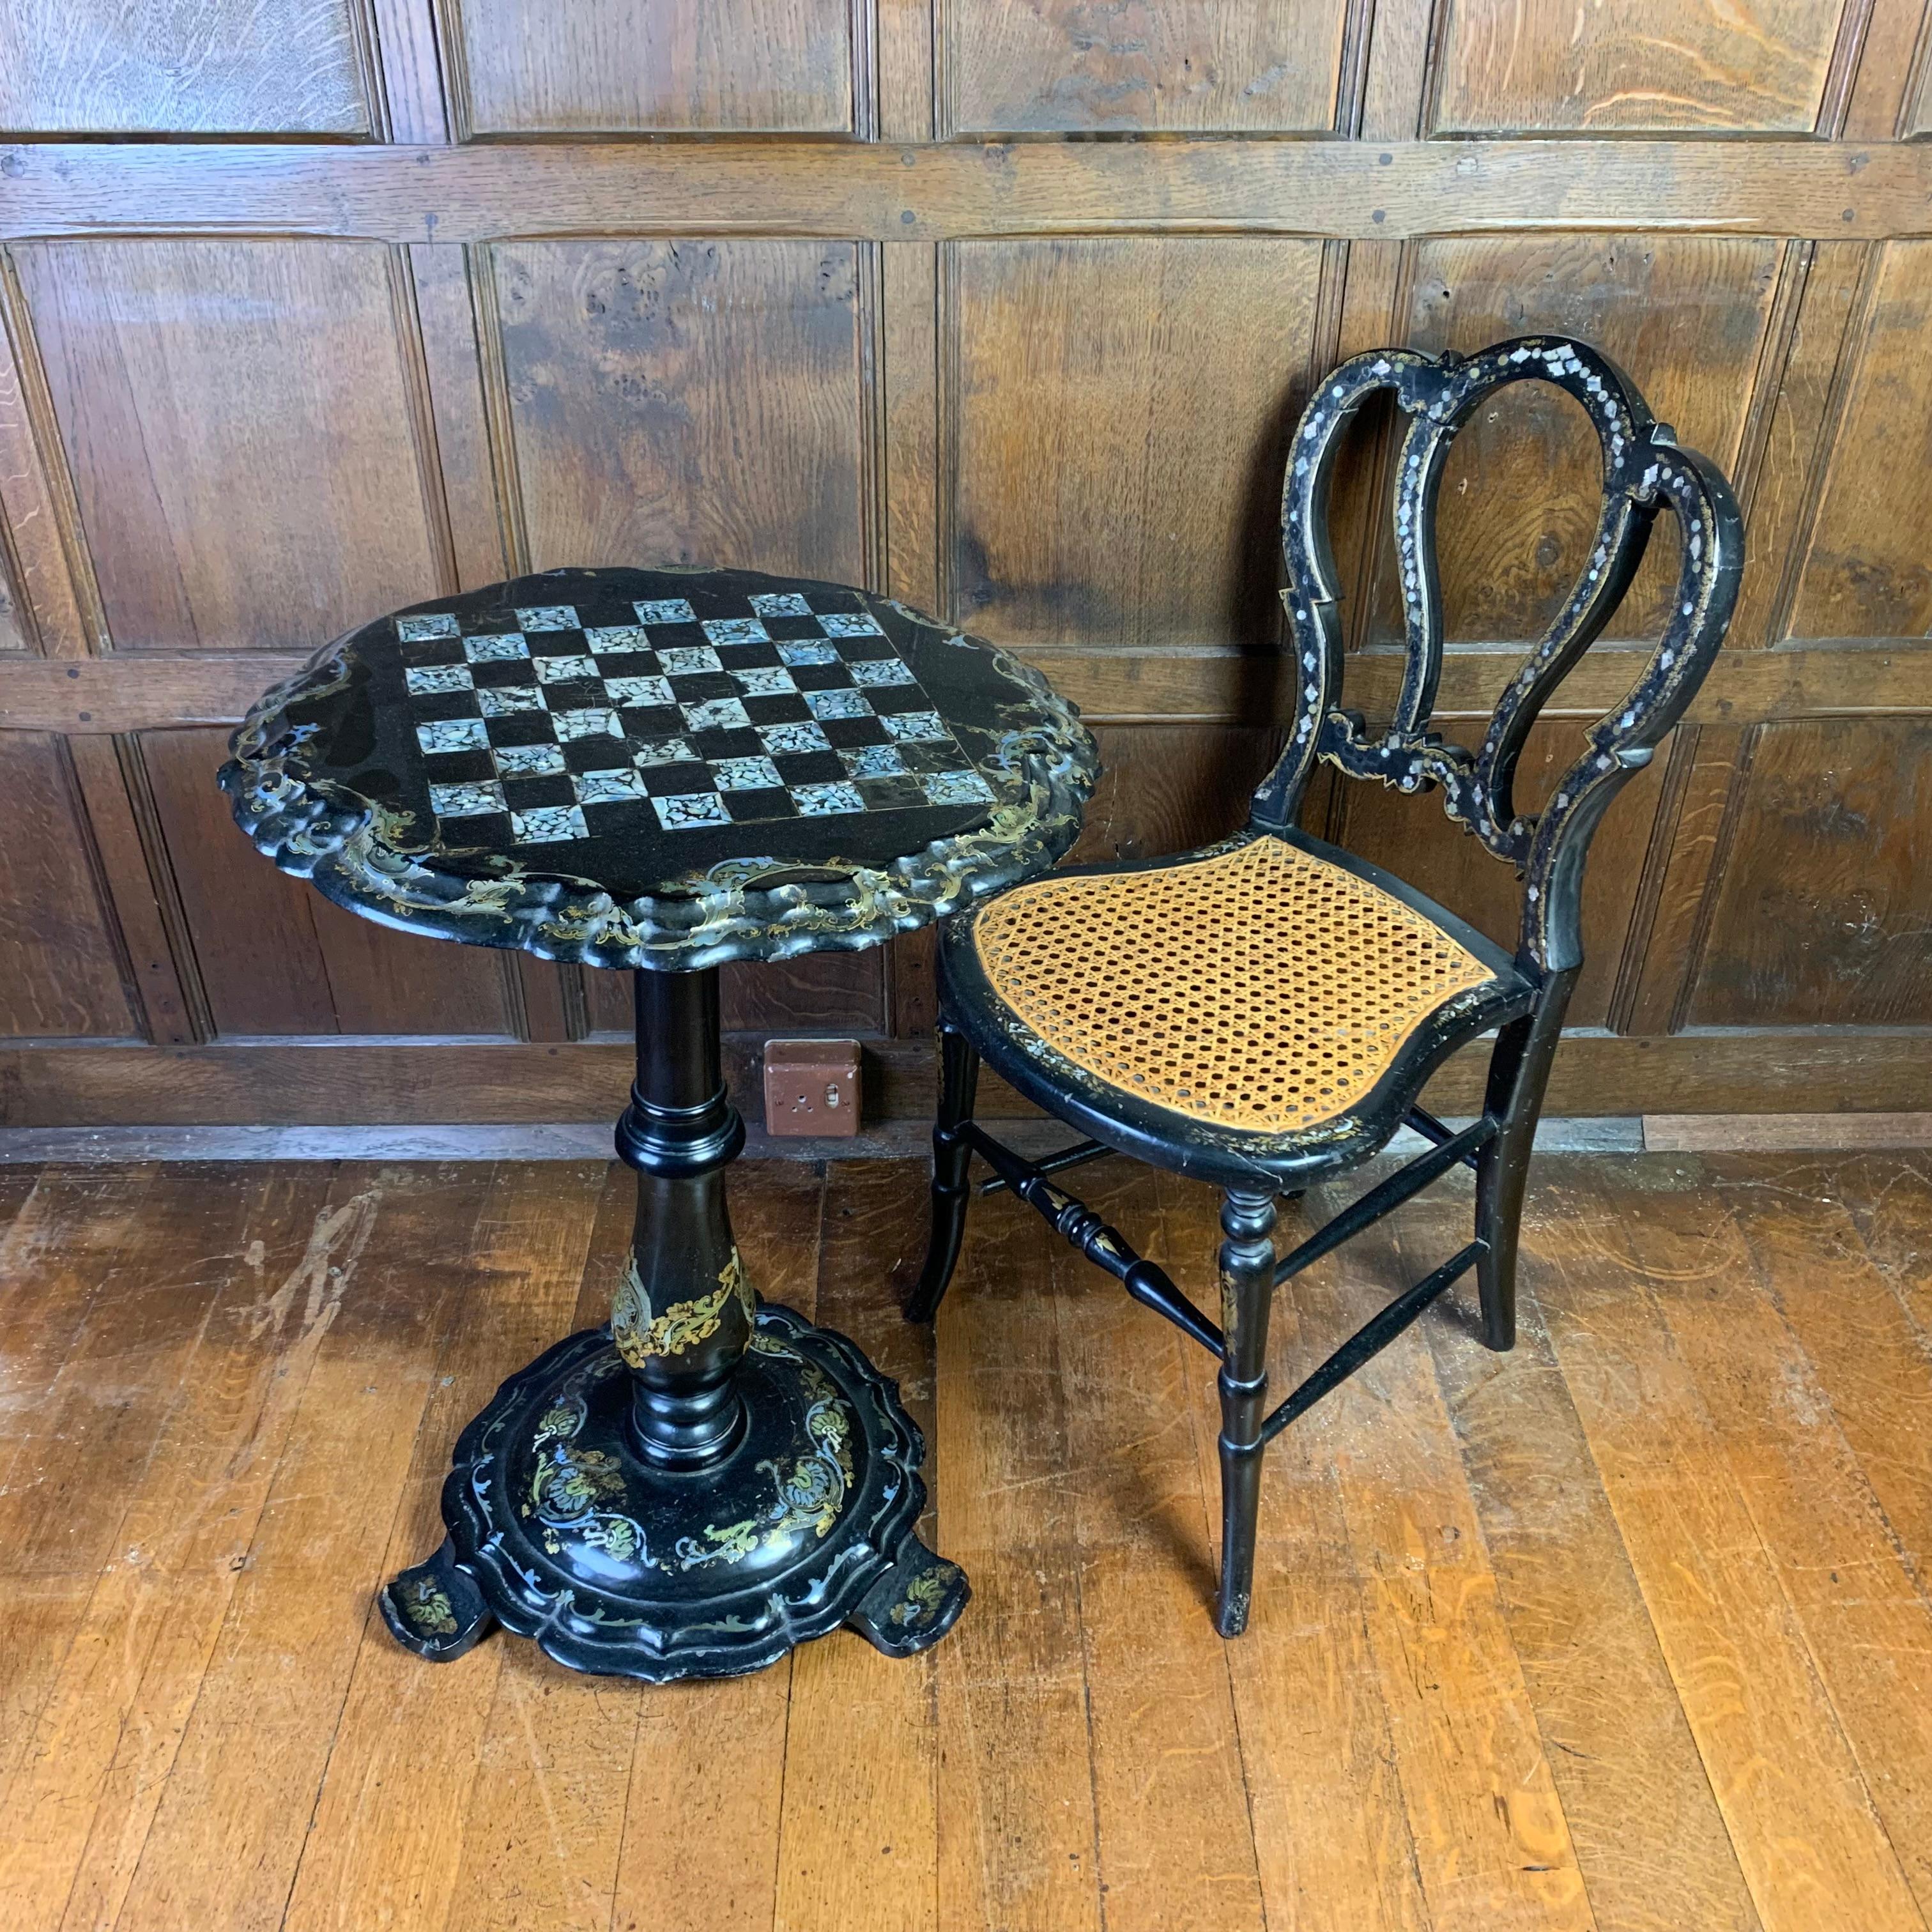 A fine quality 19th cenury papier mache tilt-top circular occasional table inset with a mother-of-pearl chess board to the top within a painted border of scrolling foliage. Raised on a vase-shaped stem and shaped circular base with three upturned